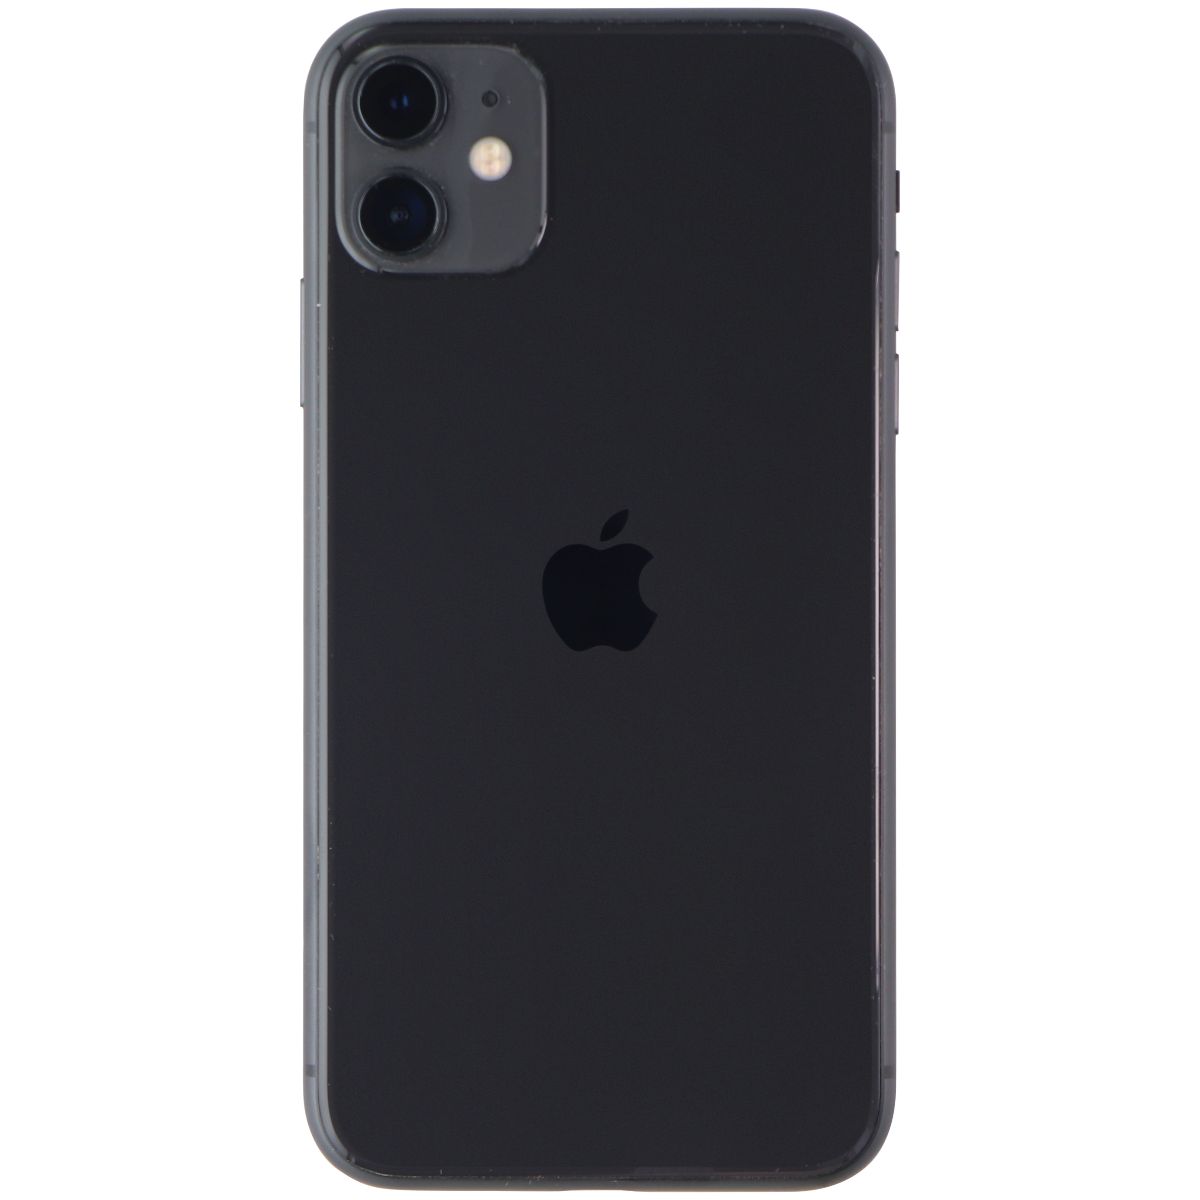 Apple iPhone 11 (6.1-inch) Smartphone (A2111) Verizon ONLY - 64GB / Black Cell Phones & Smartphones Apple    - Simple Cell Bulk Wholesale Pricing - USA Seller